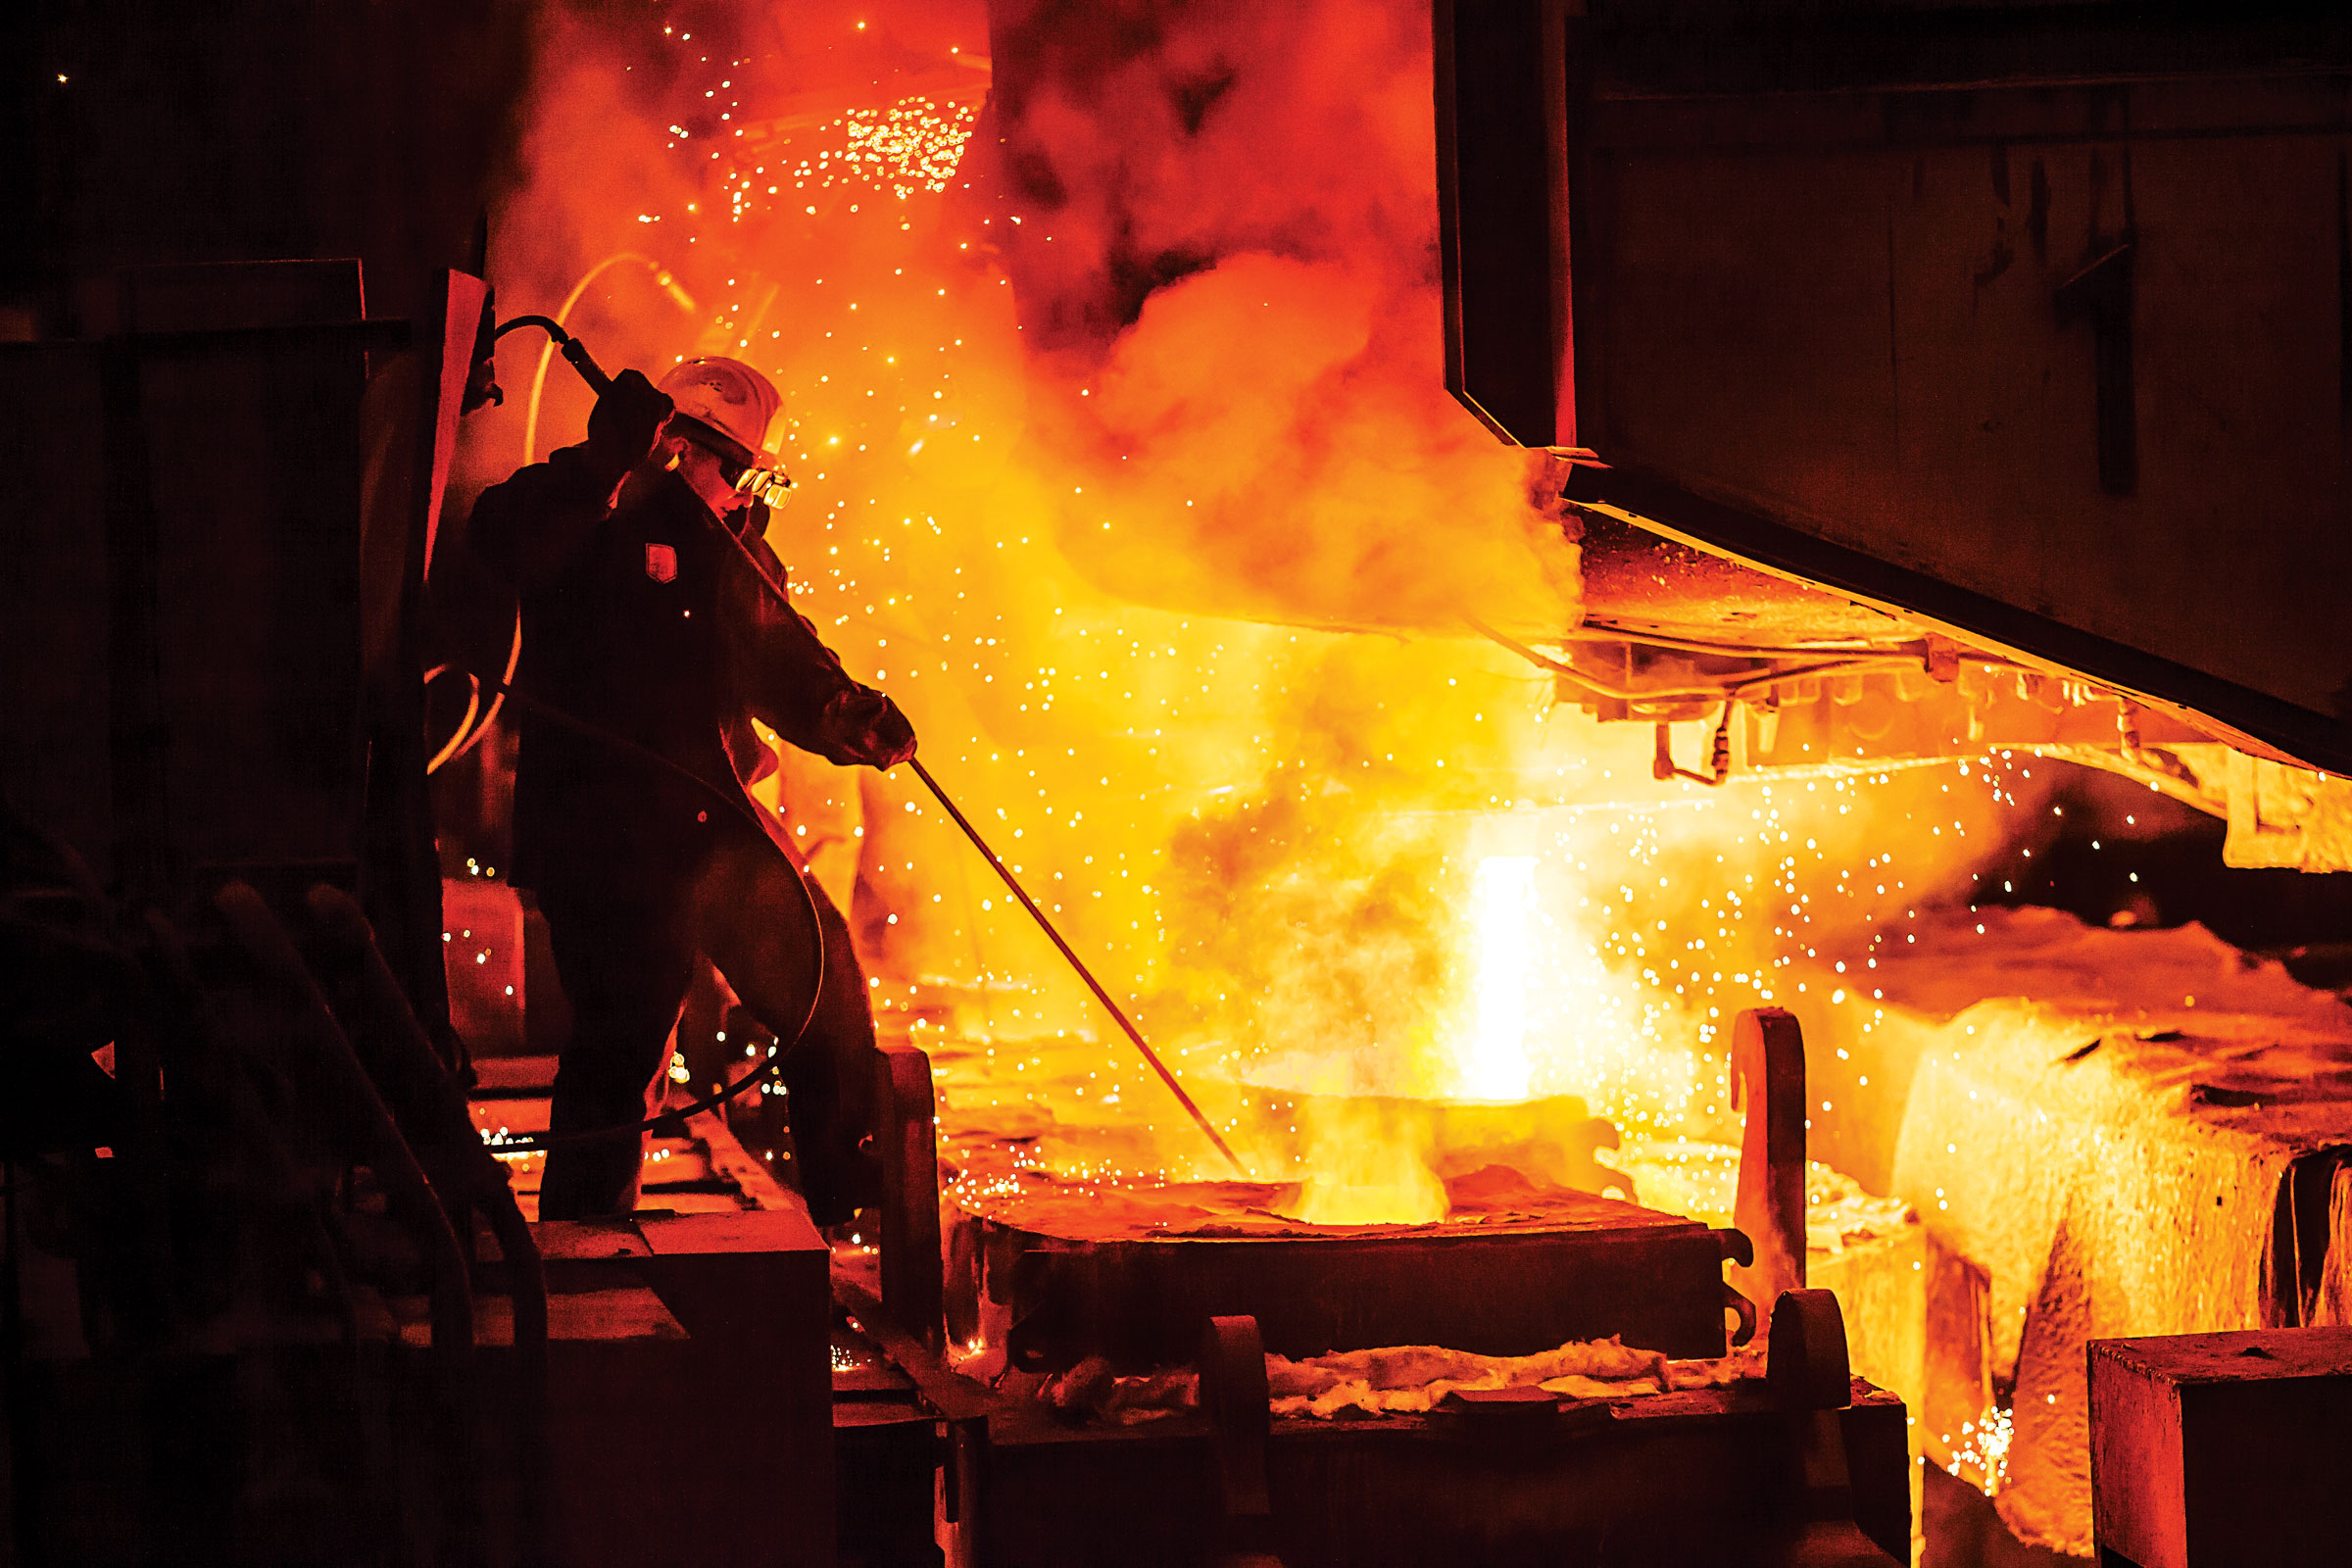 Reducing emissions from steel